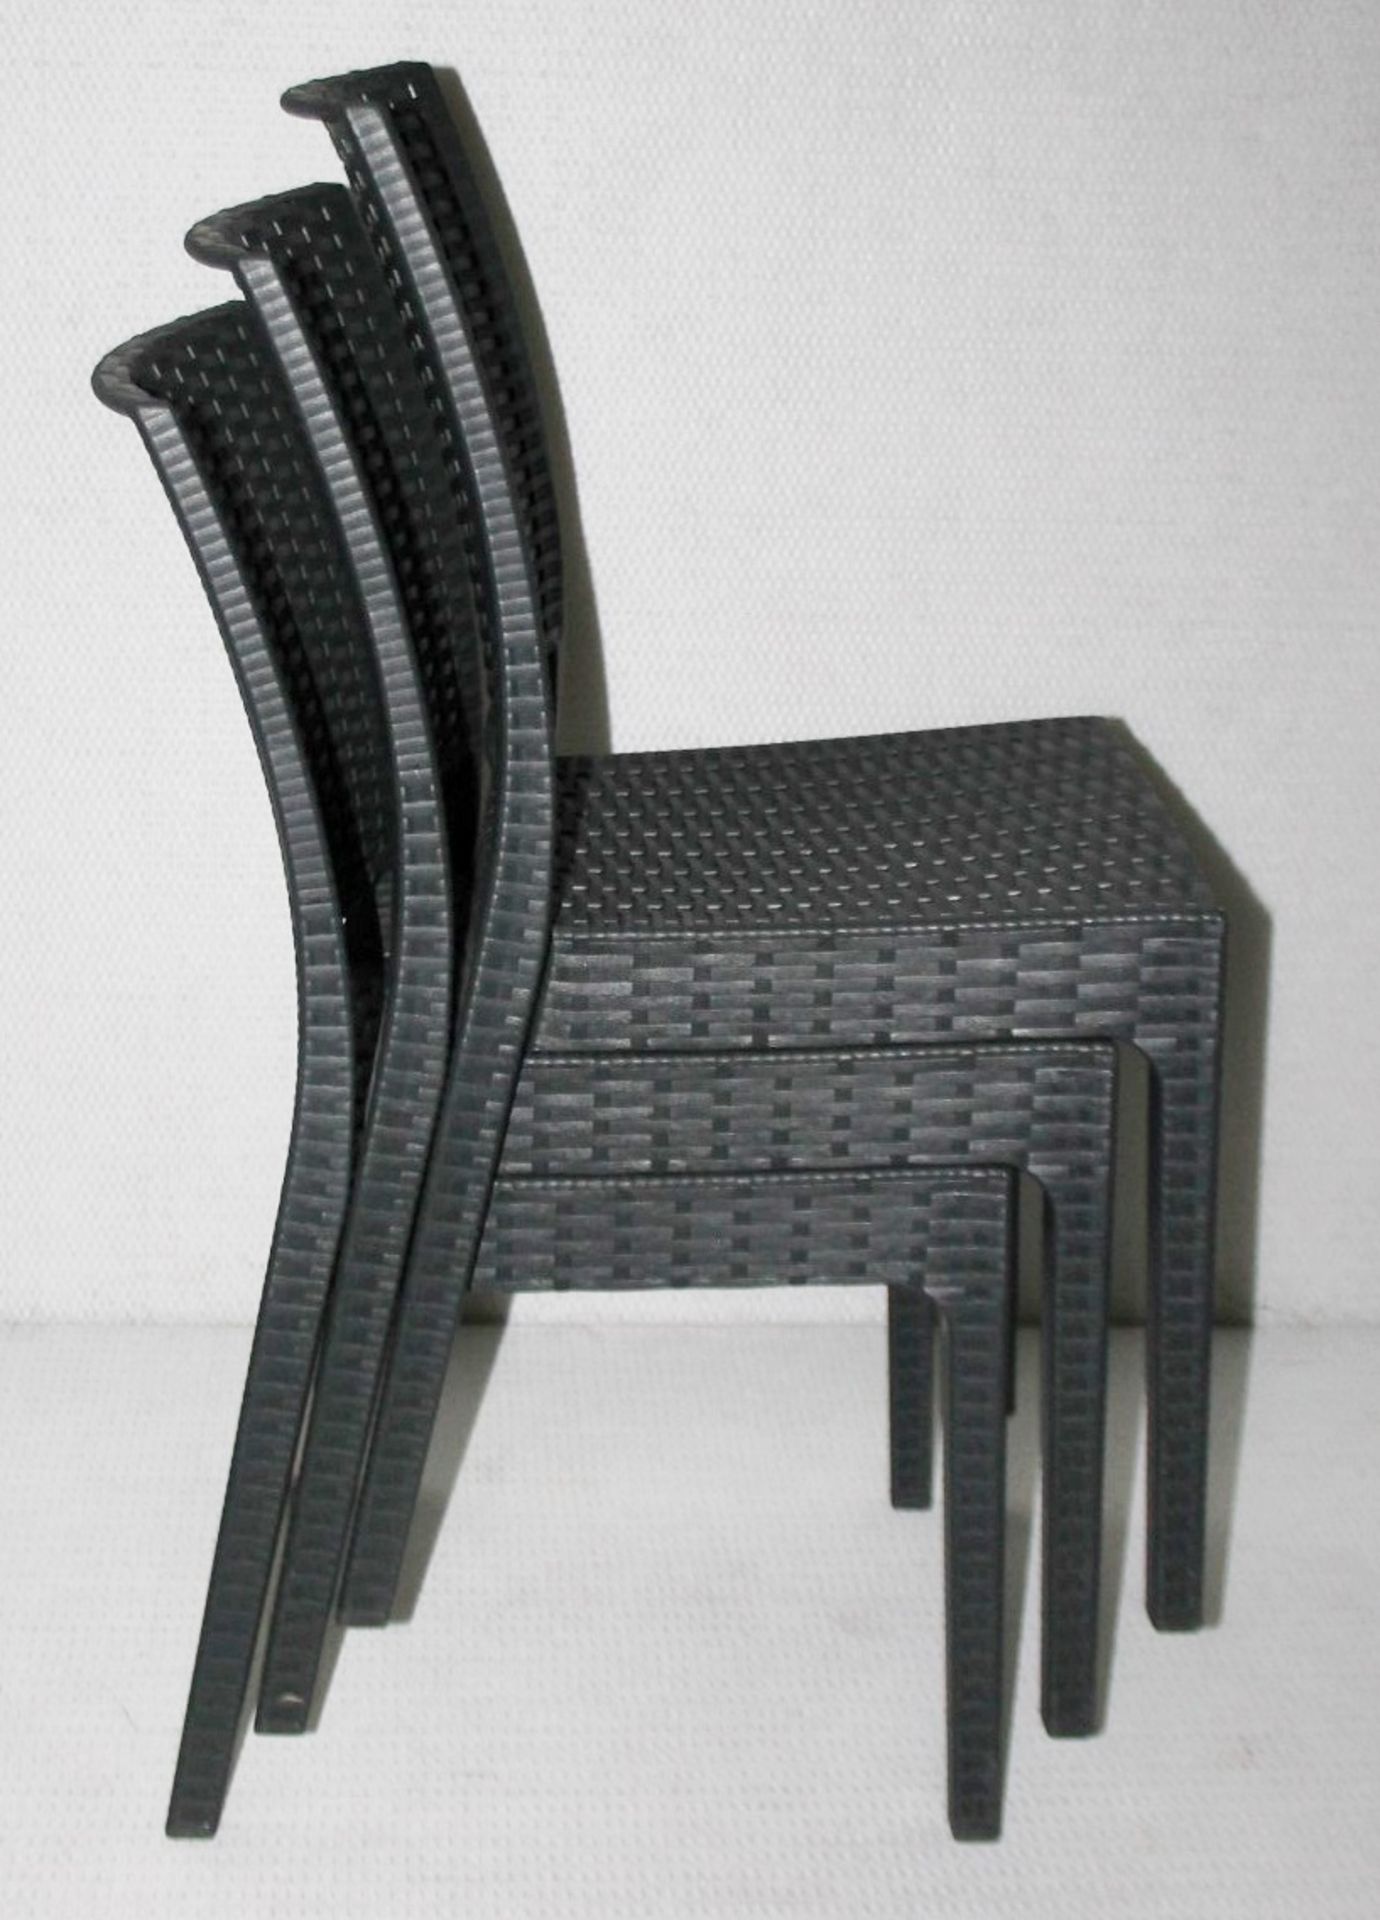 8 x SIESTA EXCLUSIVE 'Florida' Commercial Stackable Rattan-style Chairs In Dark Grey -CL987 - - Image 12 of 13